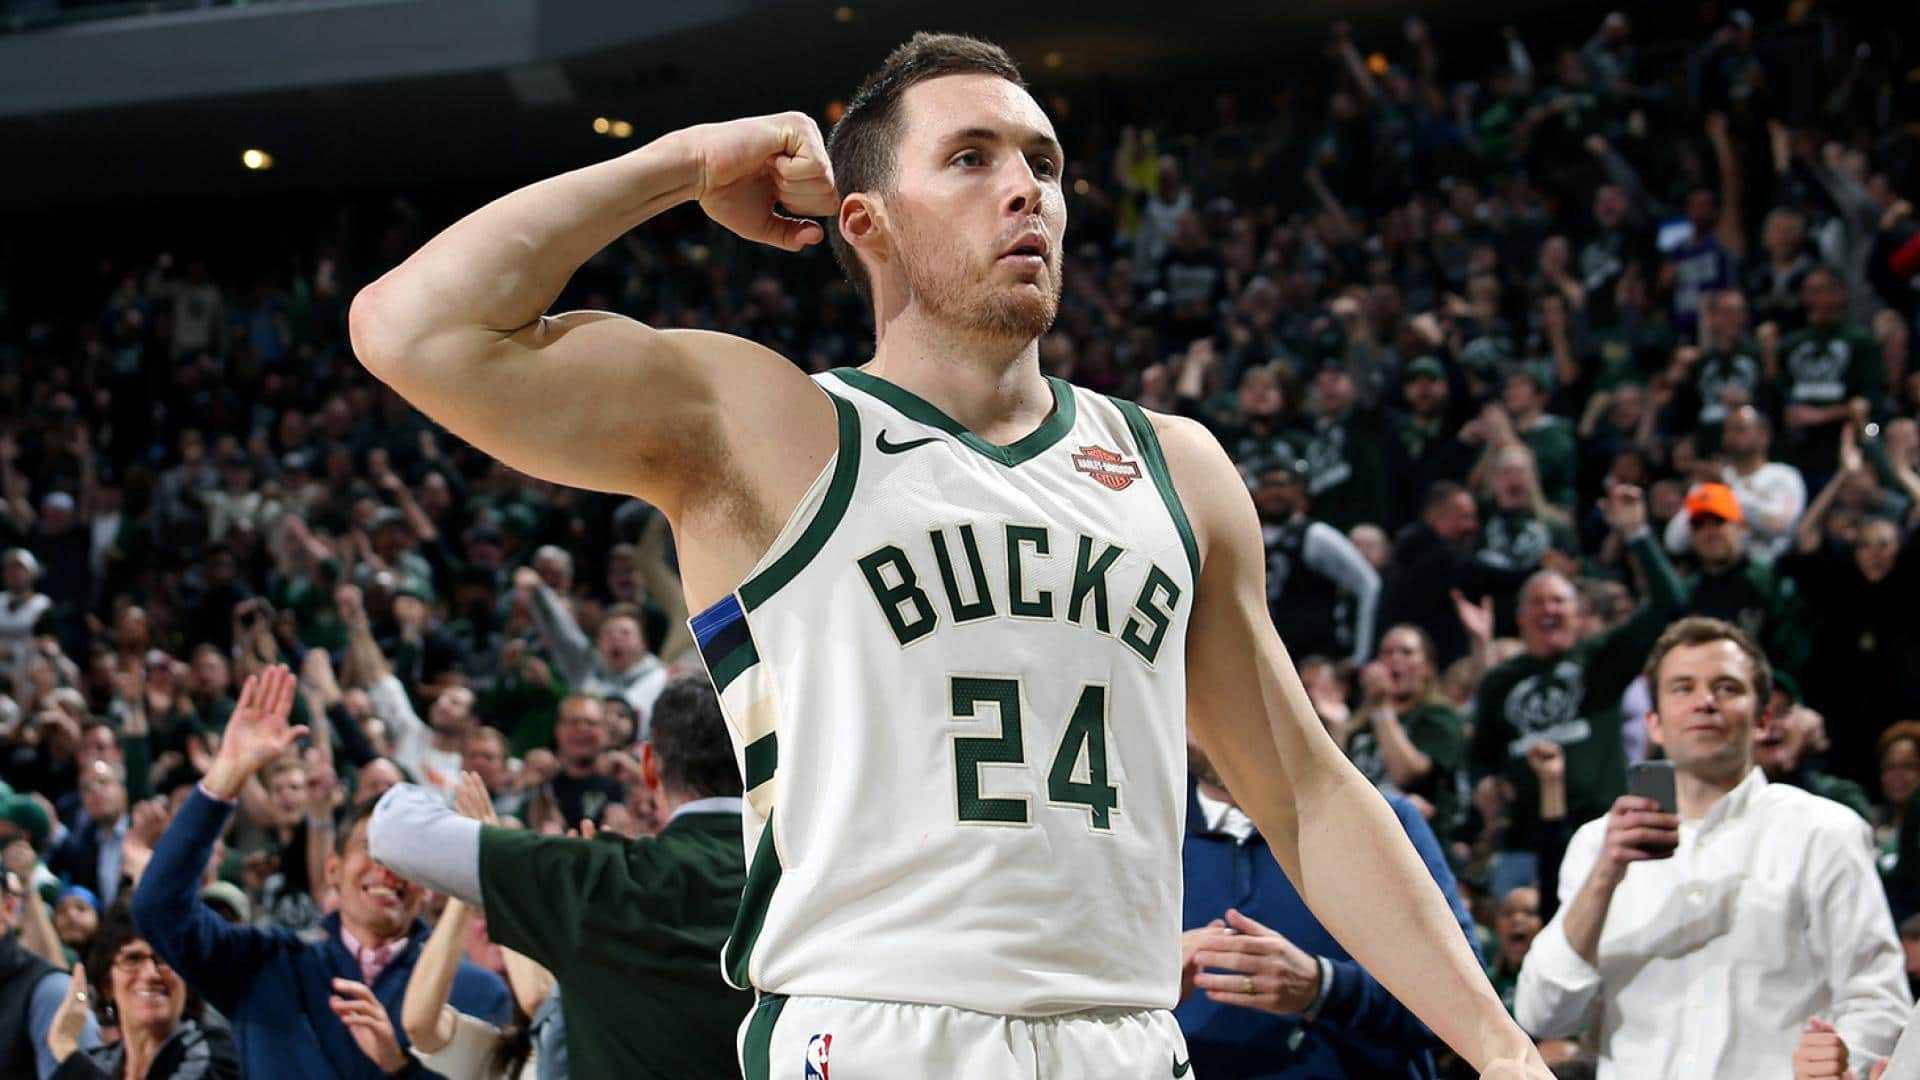 7 candidates for who the Bucks could honor next